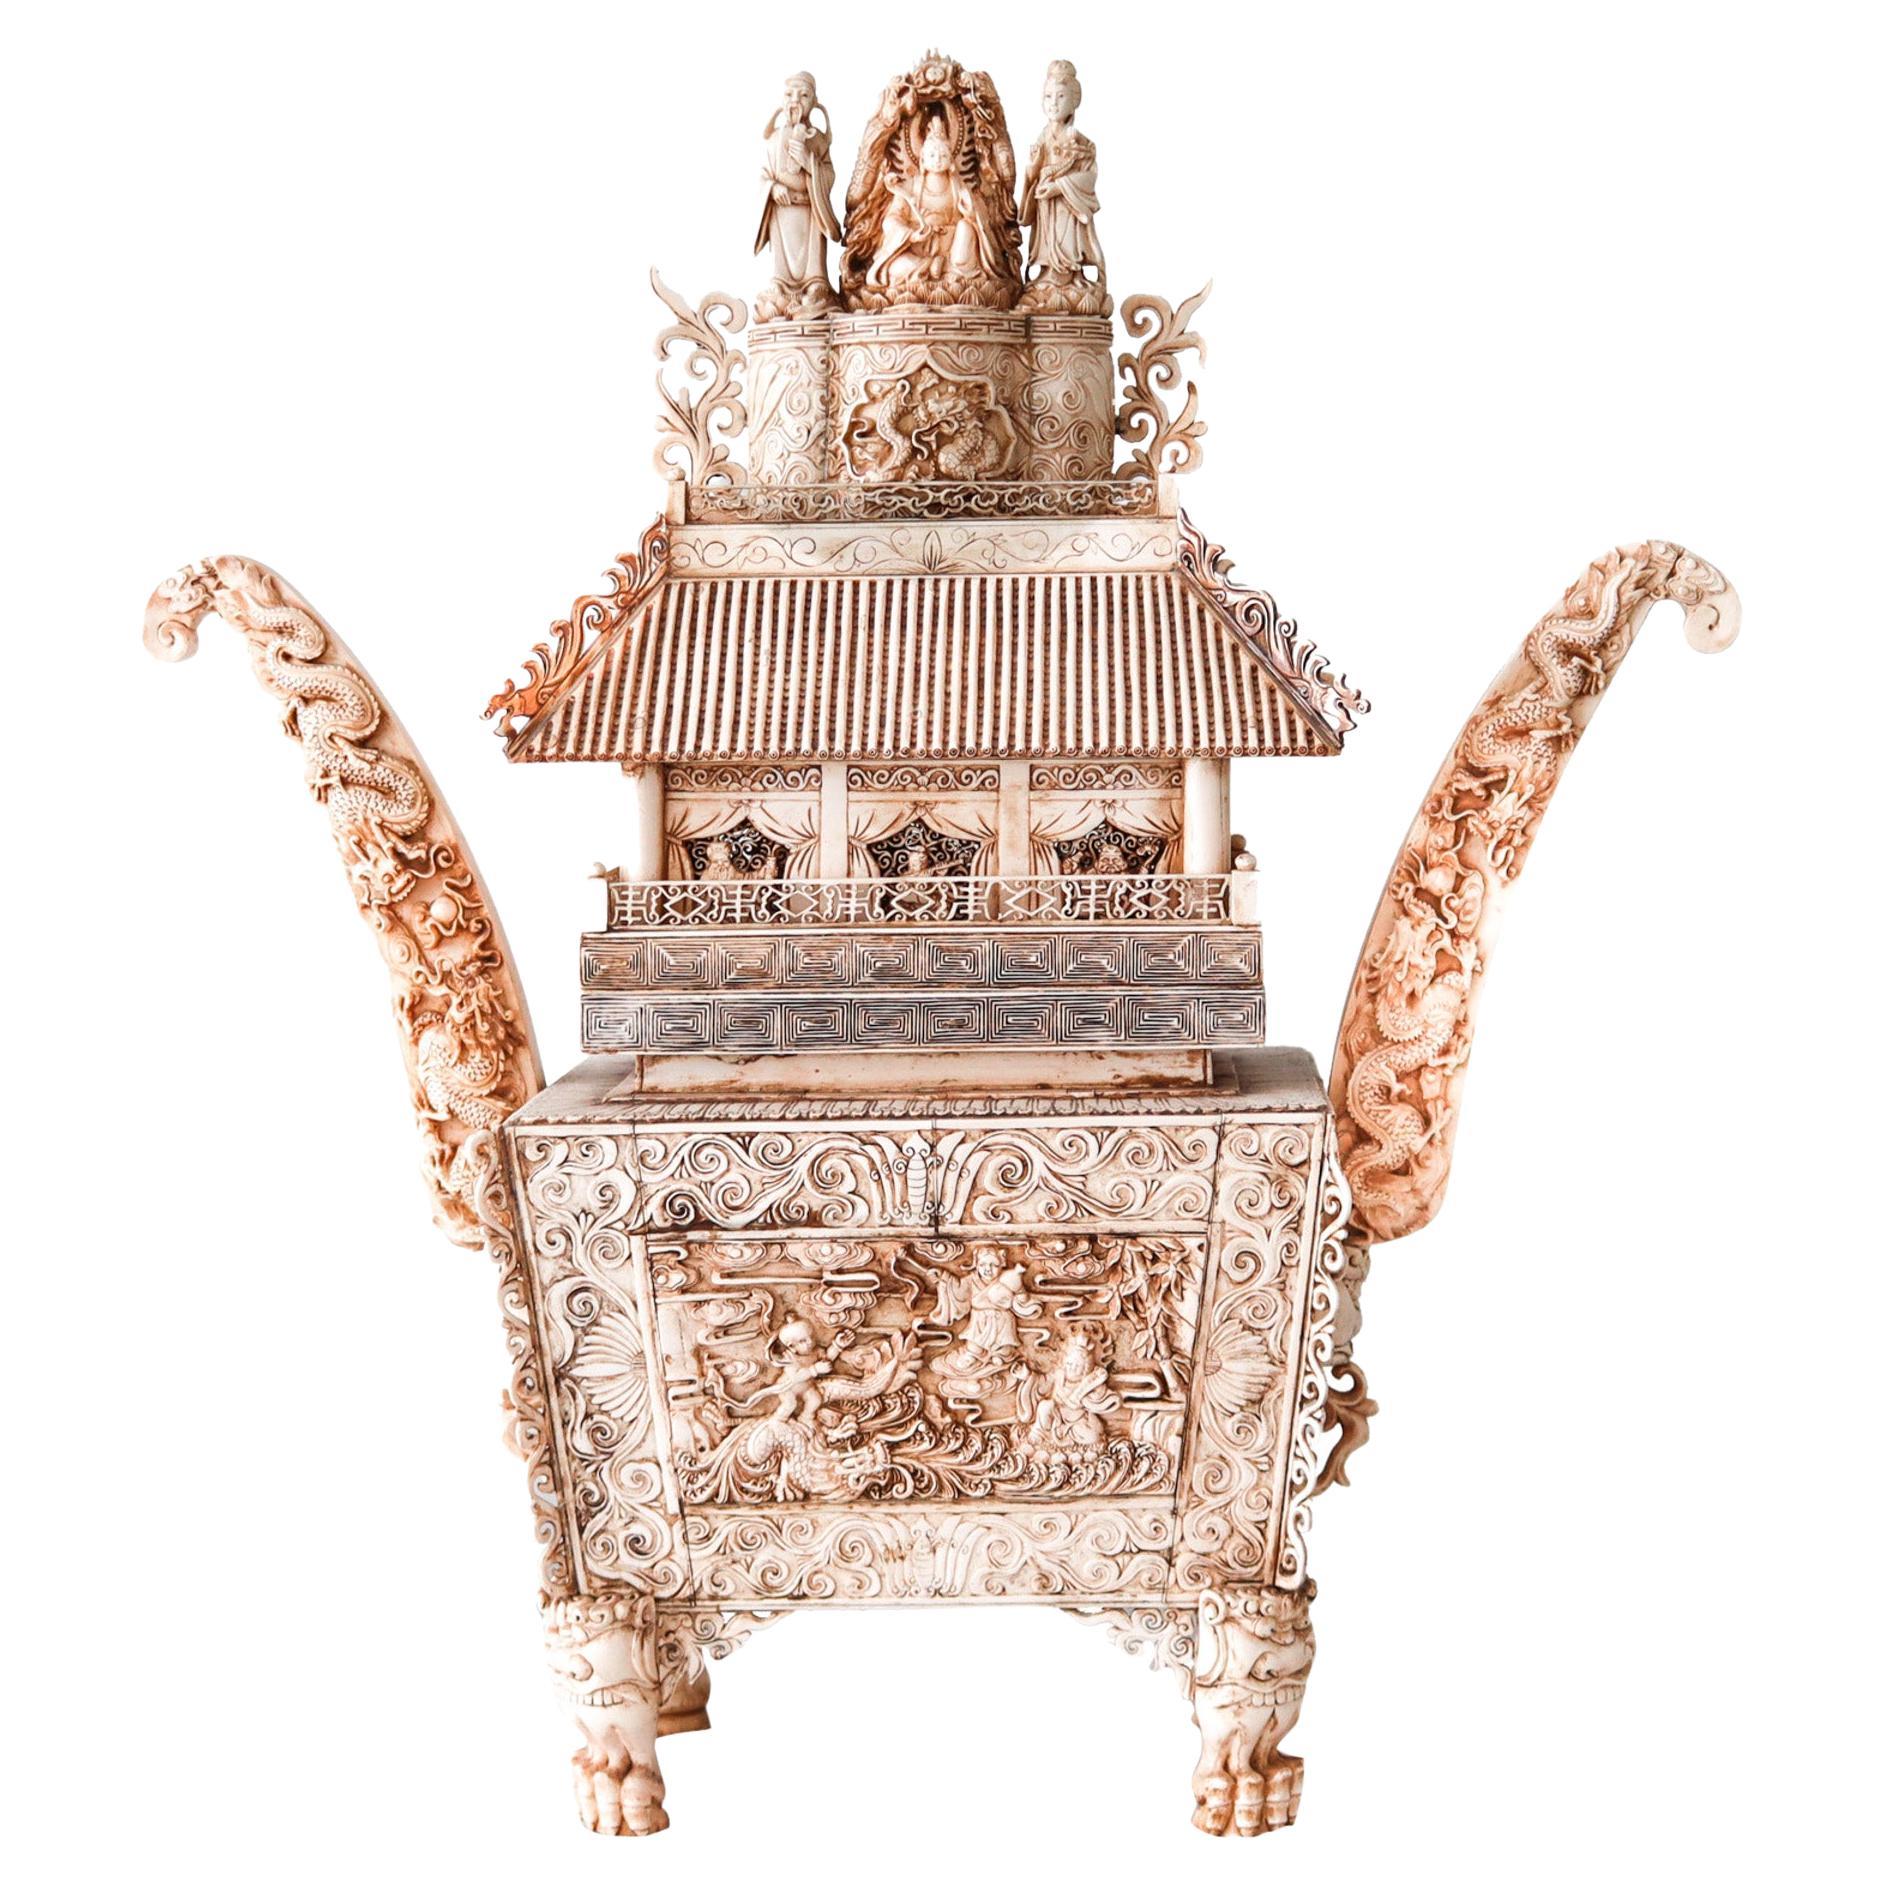 Chinoise 1900 Dynasty Qing Bodhisattva Altar Temple-Pagoda In Wood And Carvings en vente